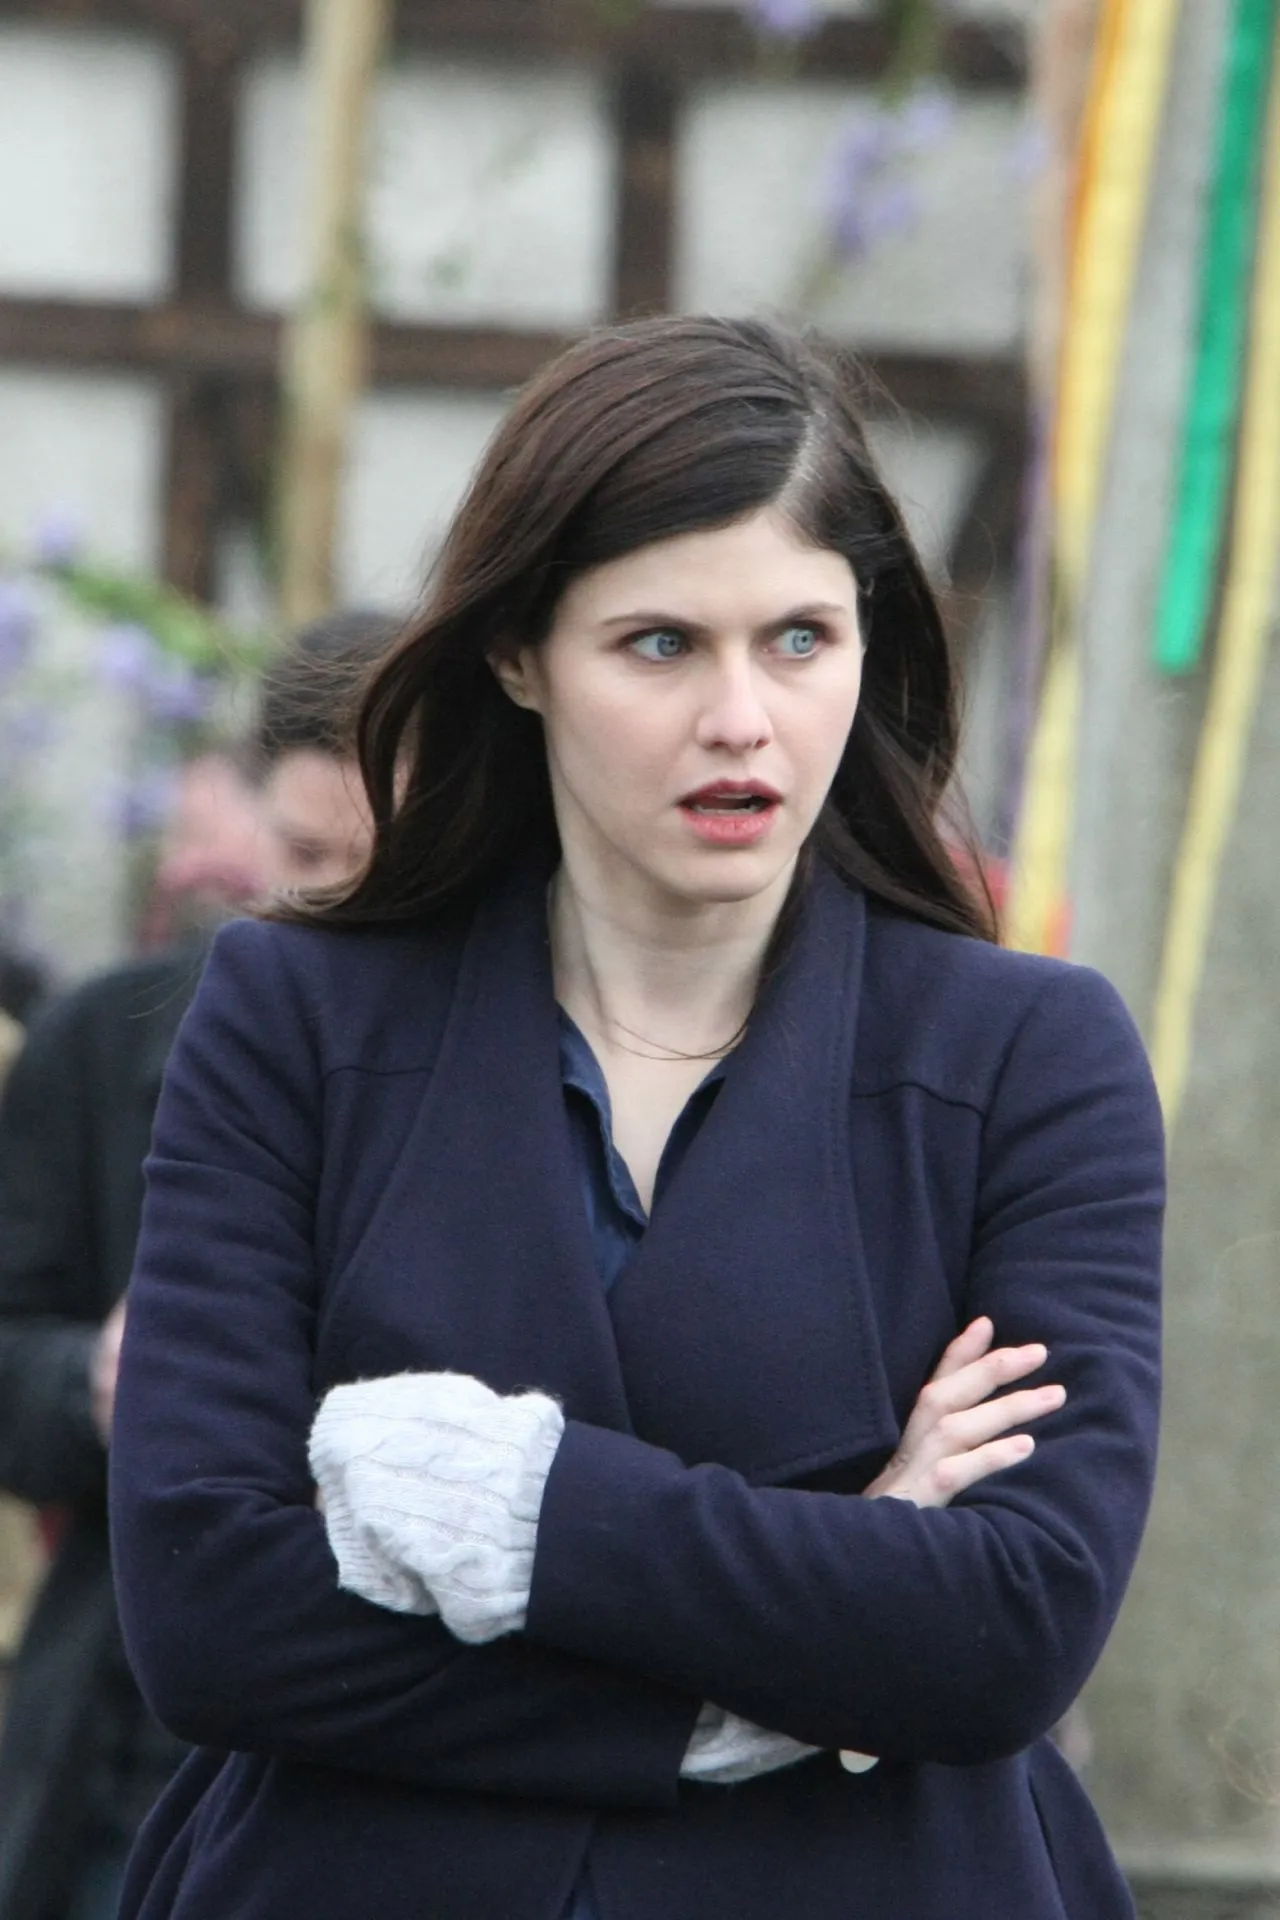 ALEXANDRA DADDARIO AT MAYFAIR WITCHES FILMING SET IN IRELAND